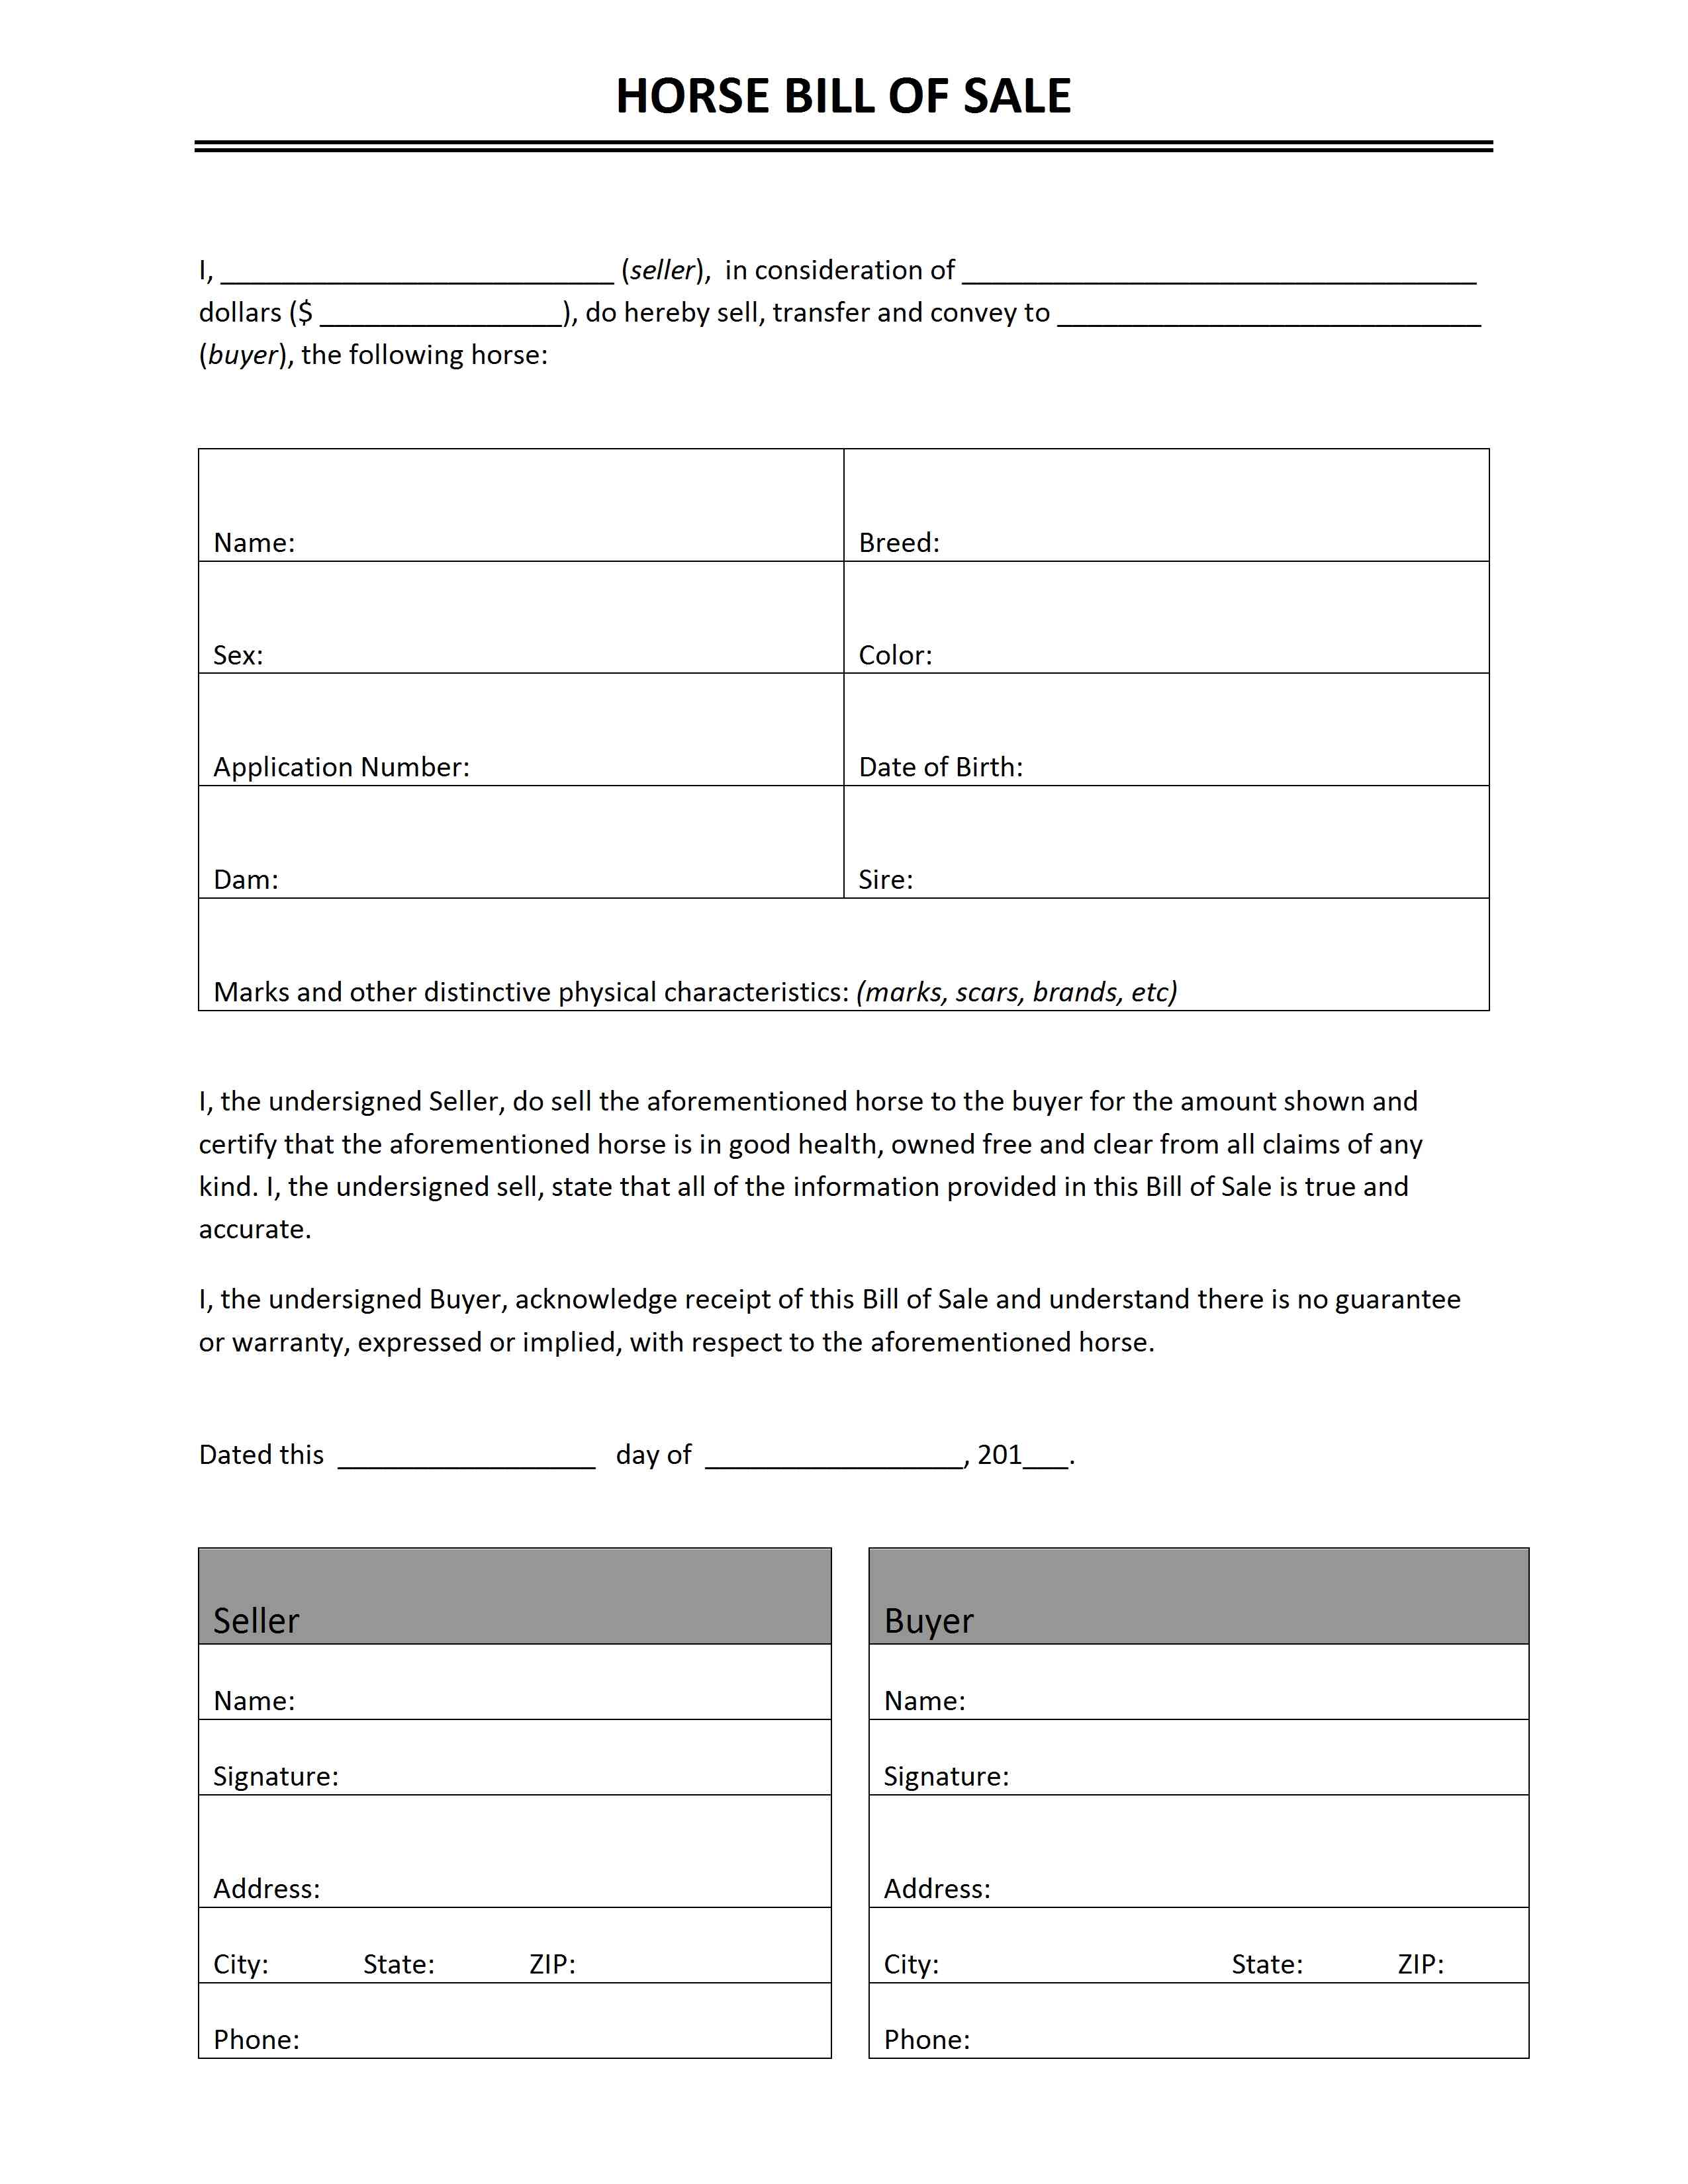 simple horse bill of sale template